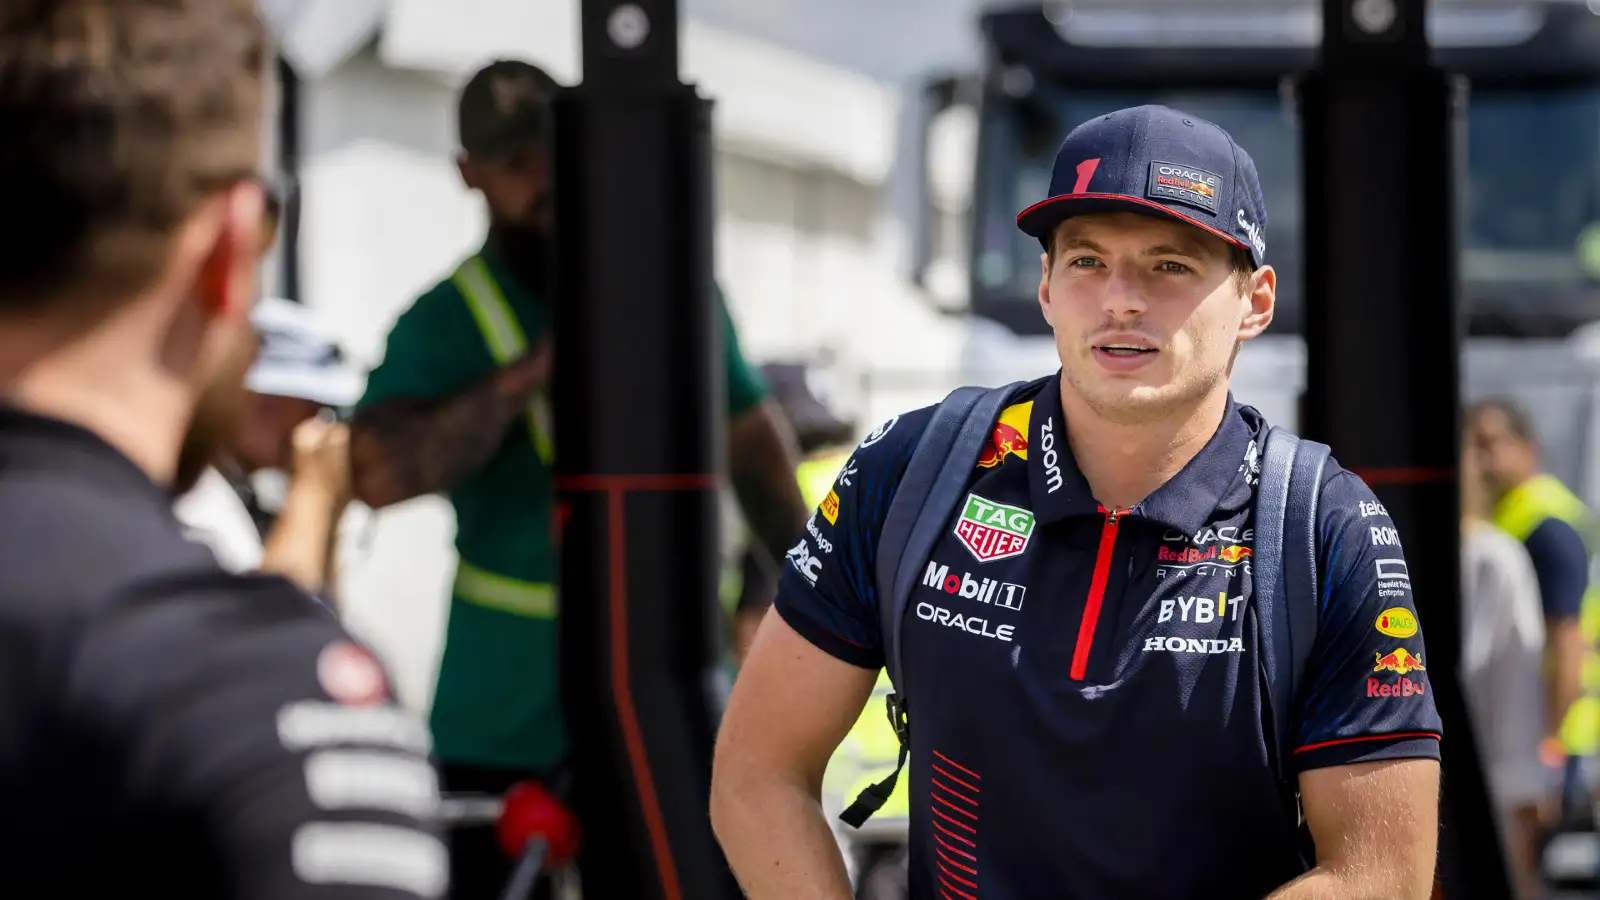 Italian Grand Prix: Max Verstappen arrives for the weekend at Monza.